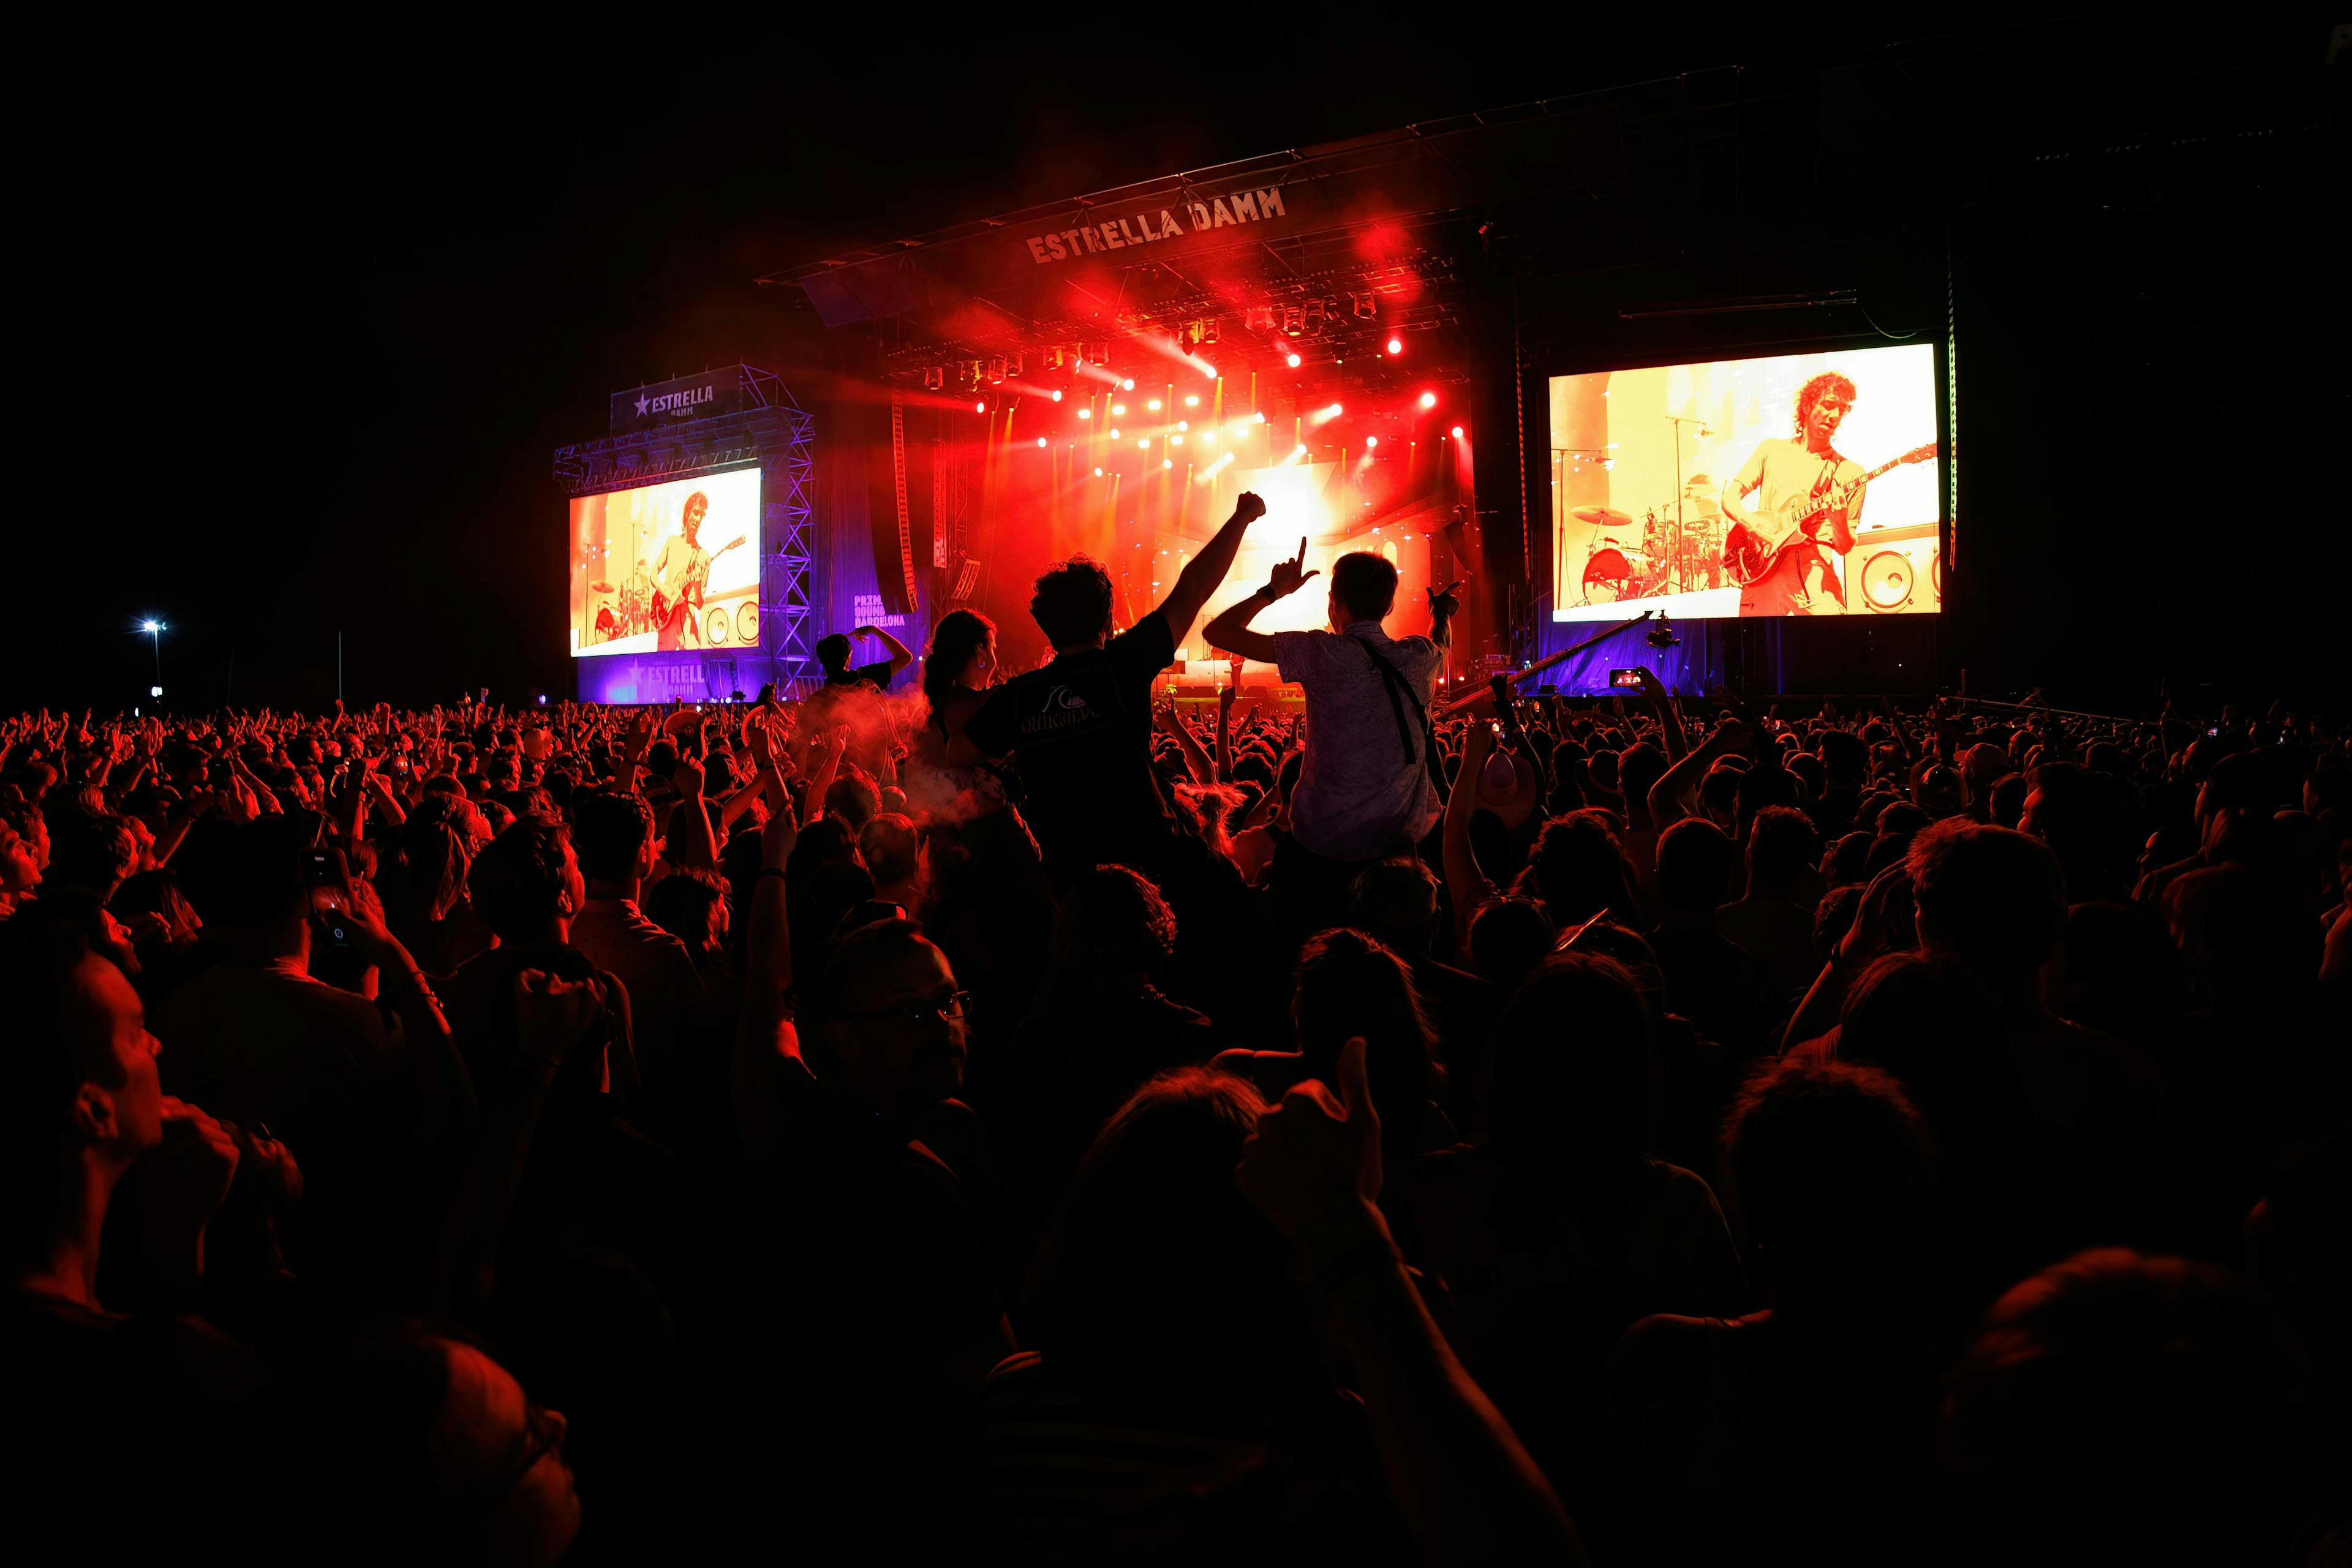 concert crowd person urban stage cinema adult male man guitar